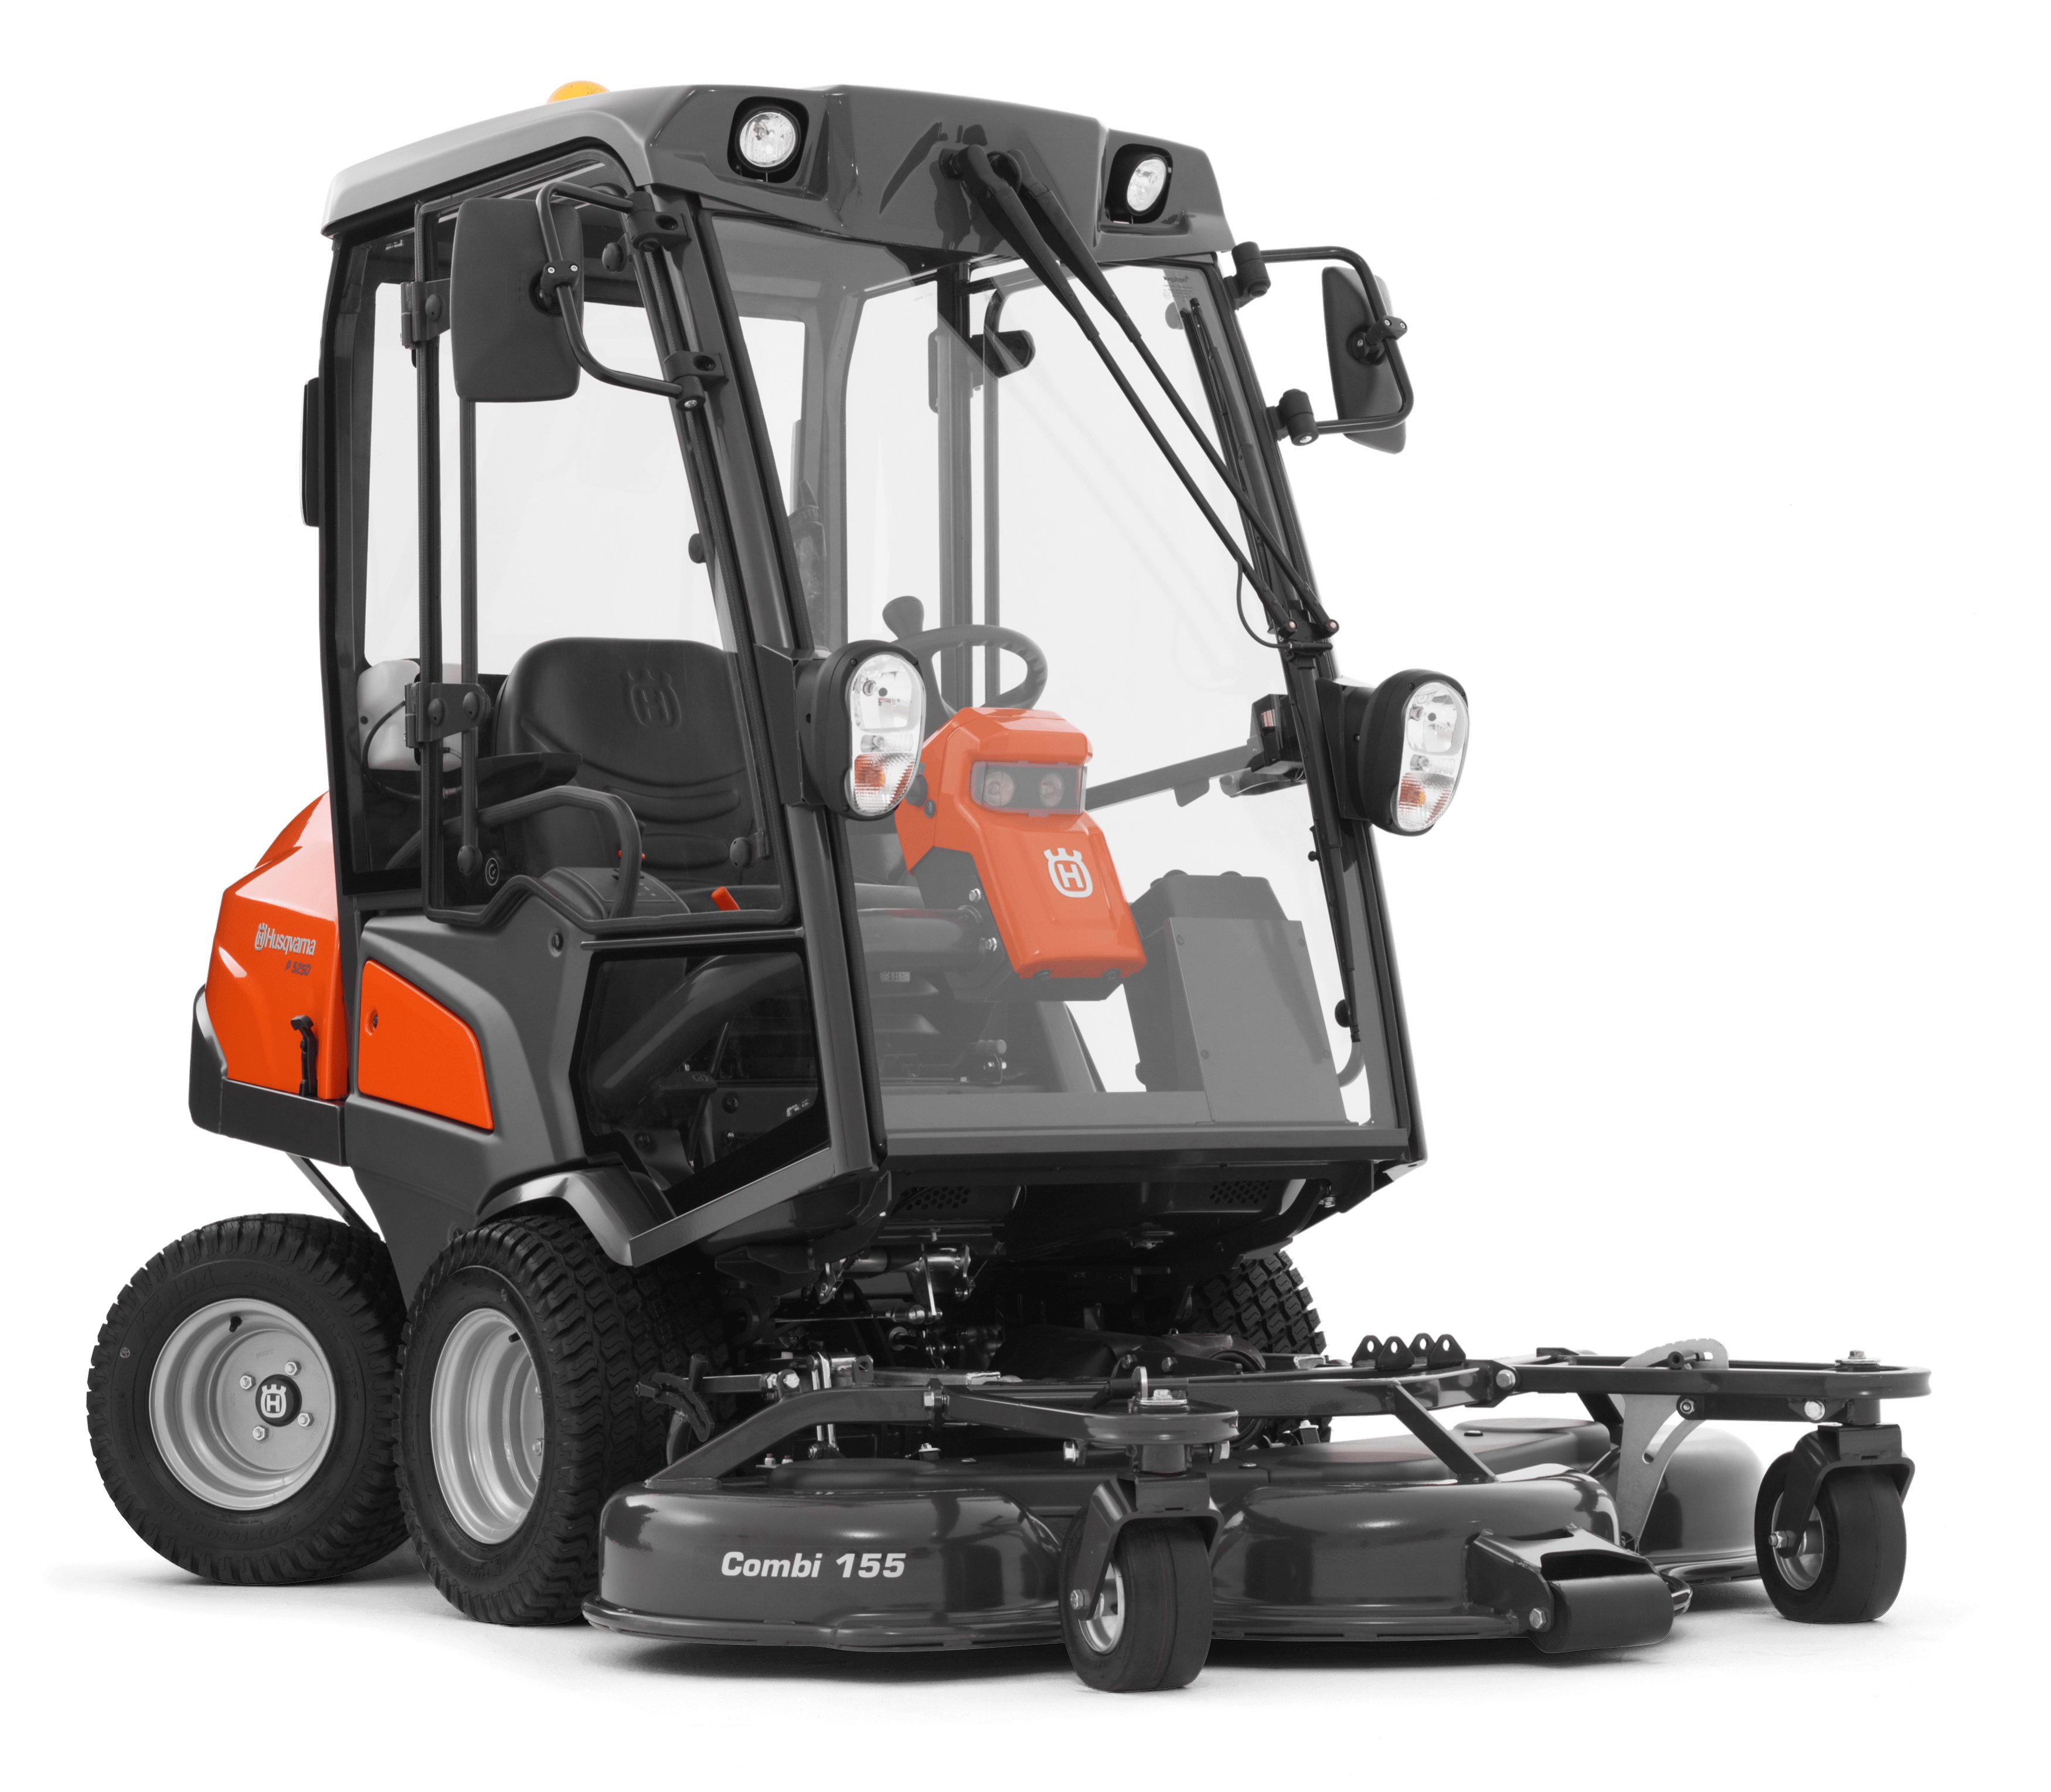 Front Mower P 525D with cabin